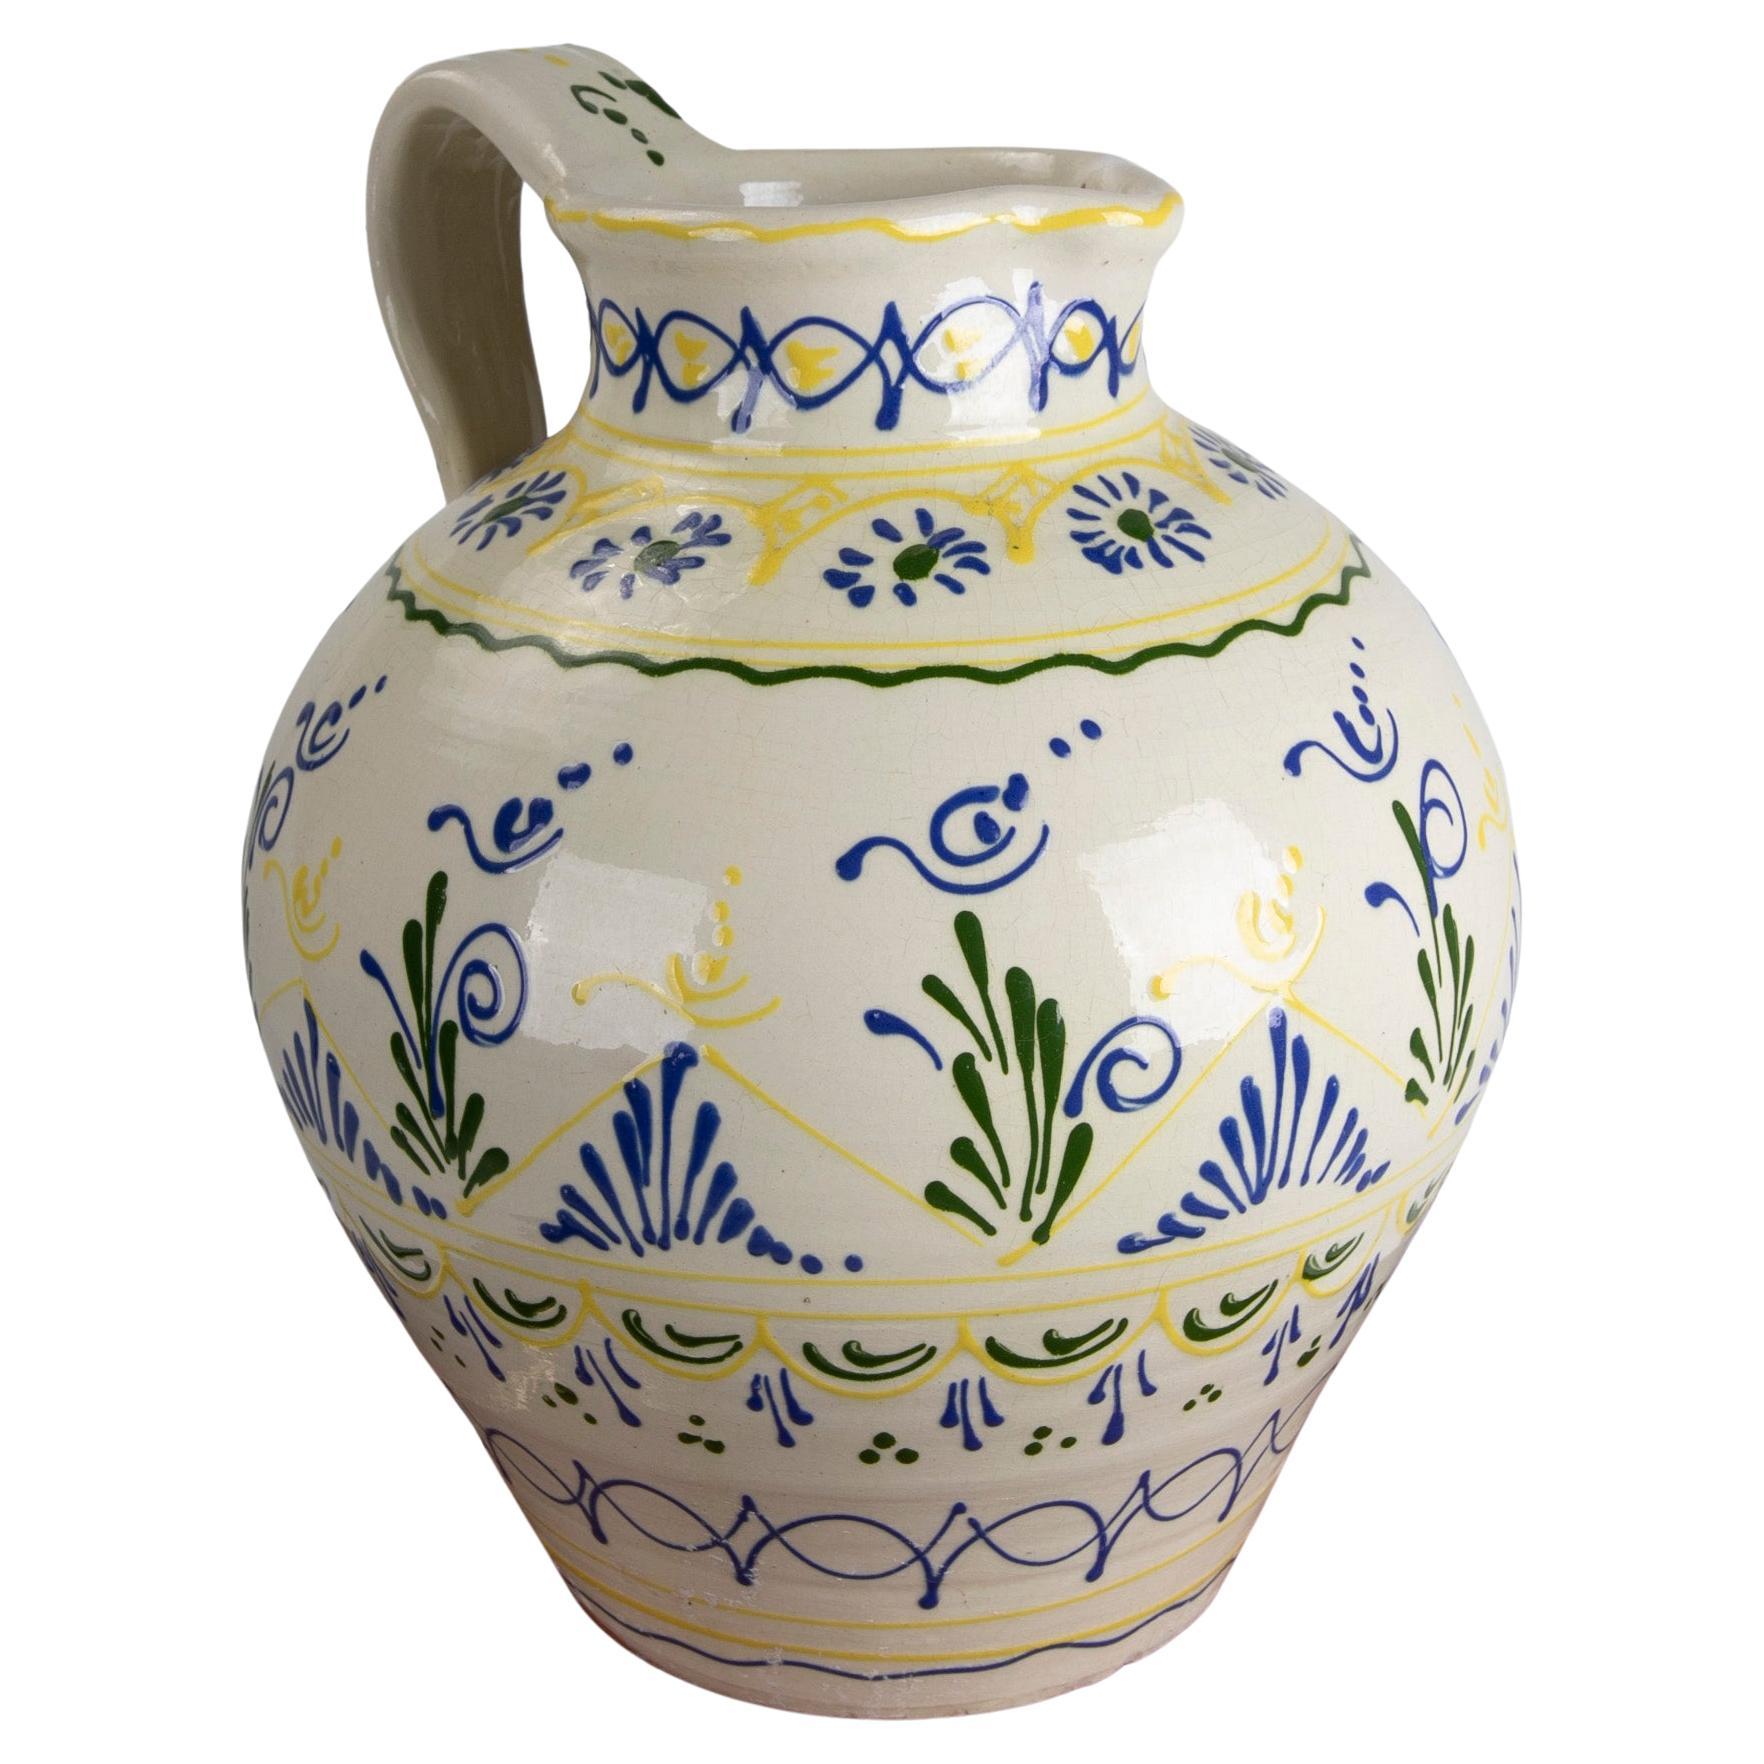 1980s Spanish Hand-Painted Ceramic Jug with Handle for Wine